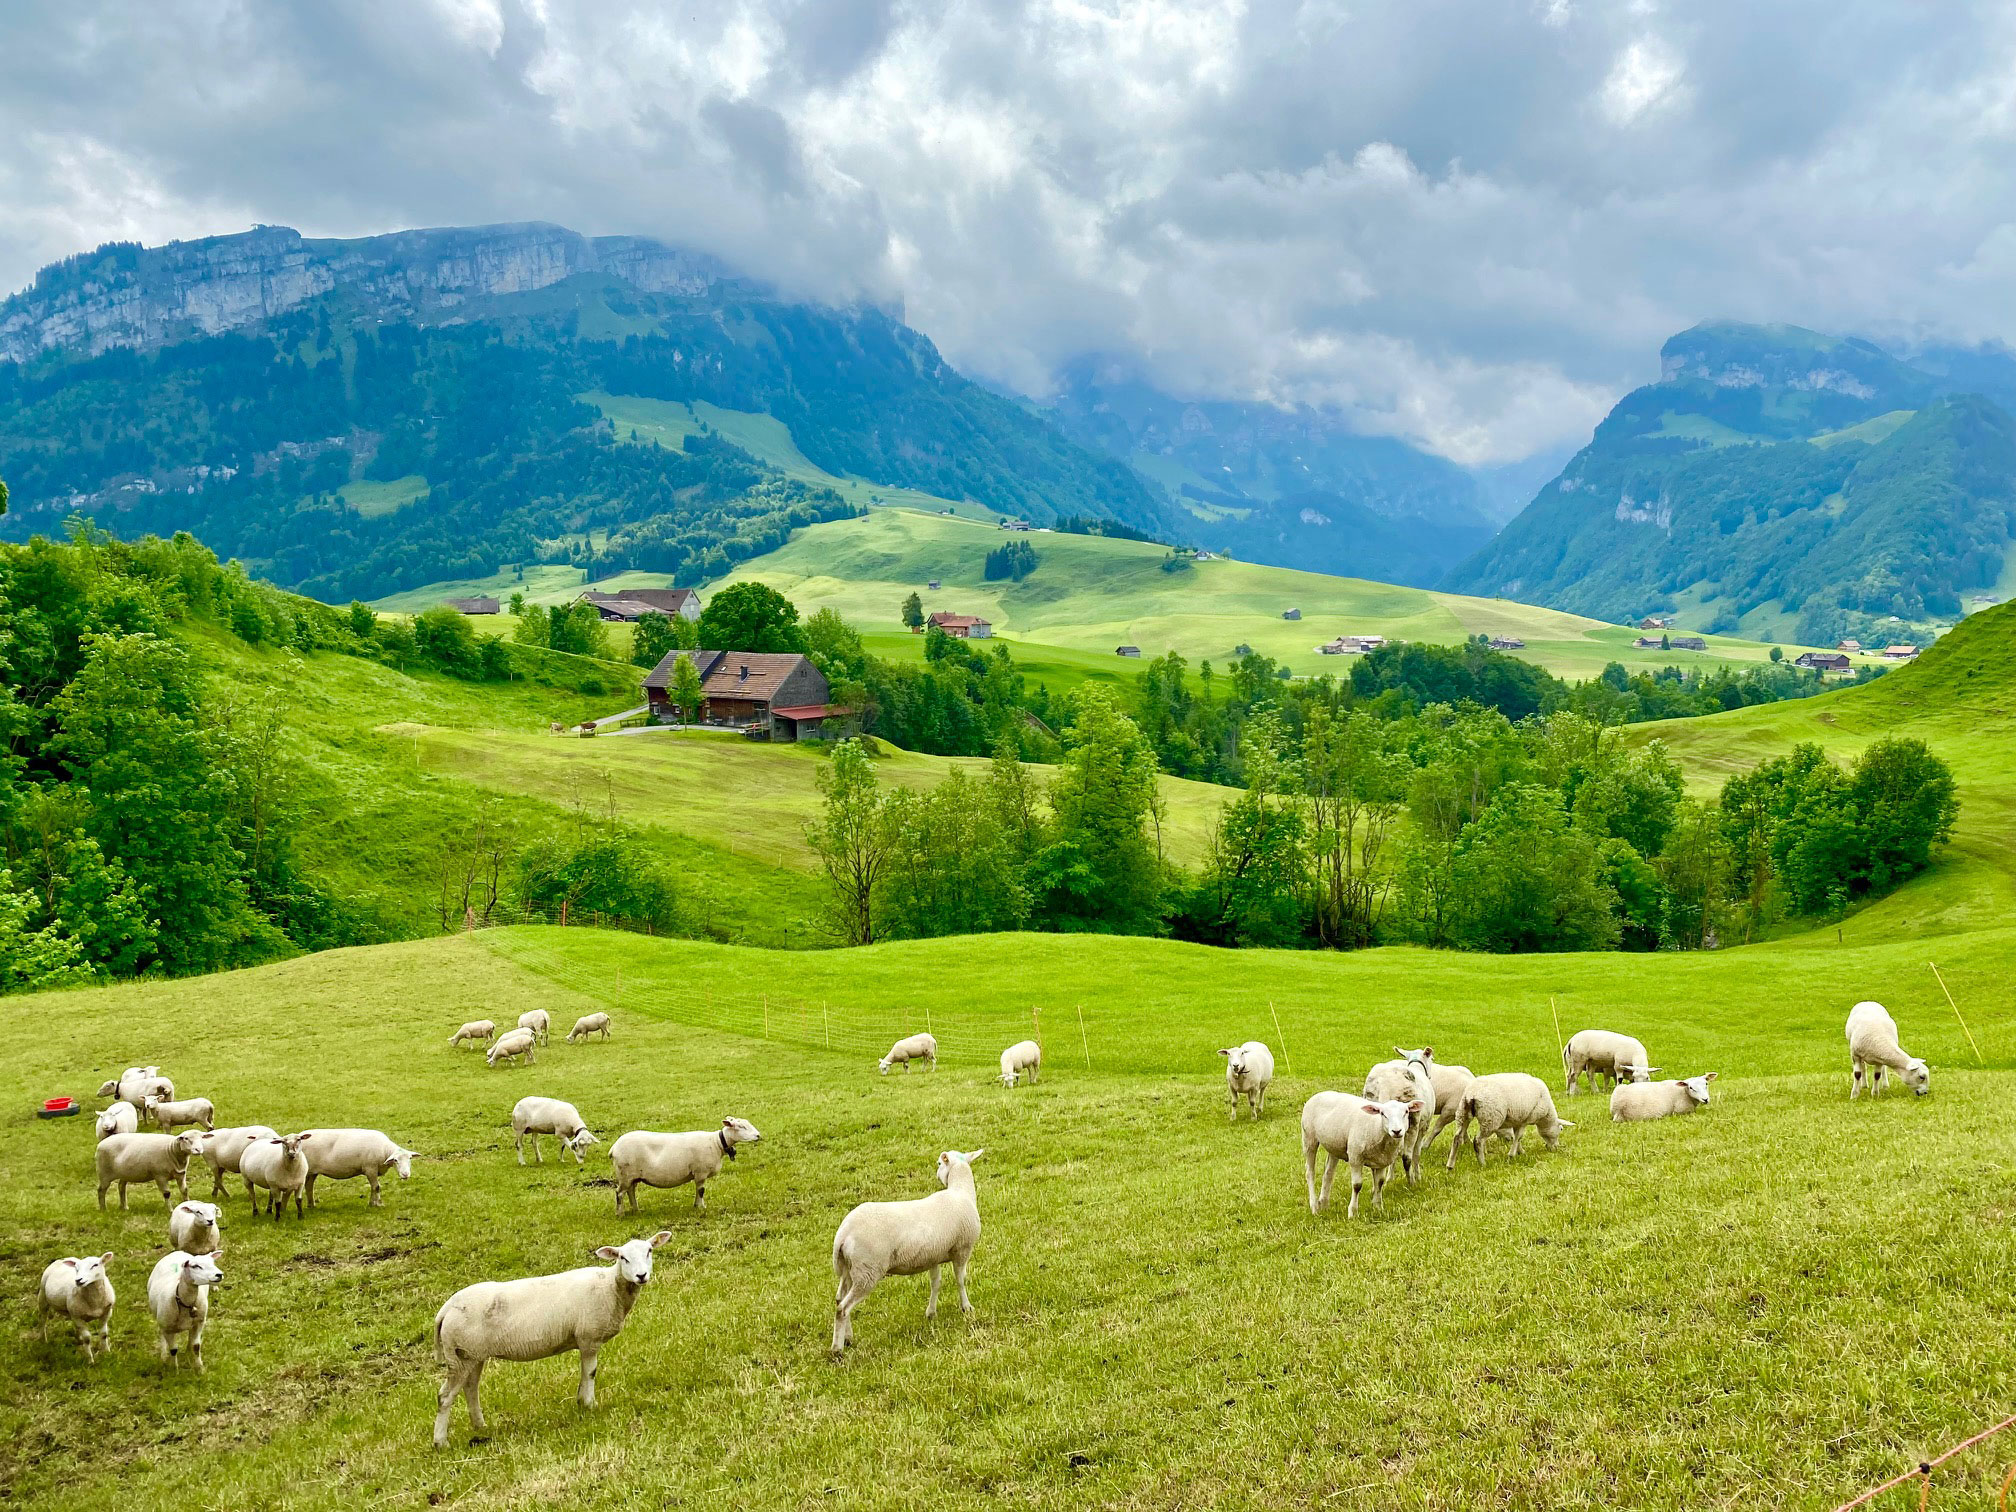 Swiss Farm Experience, Appenzell & Rhine Falls Day Tour (from Zurich)